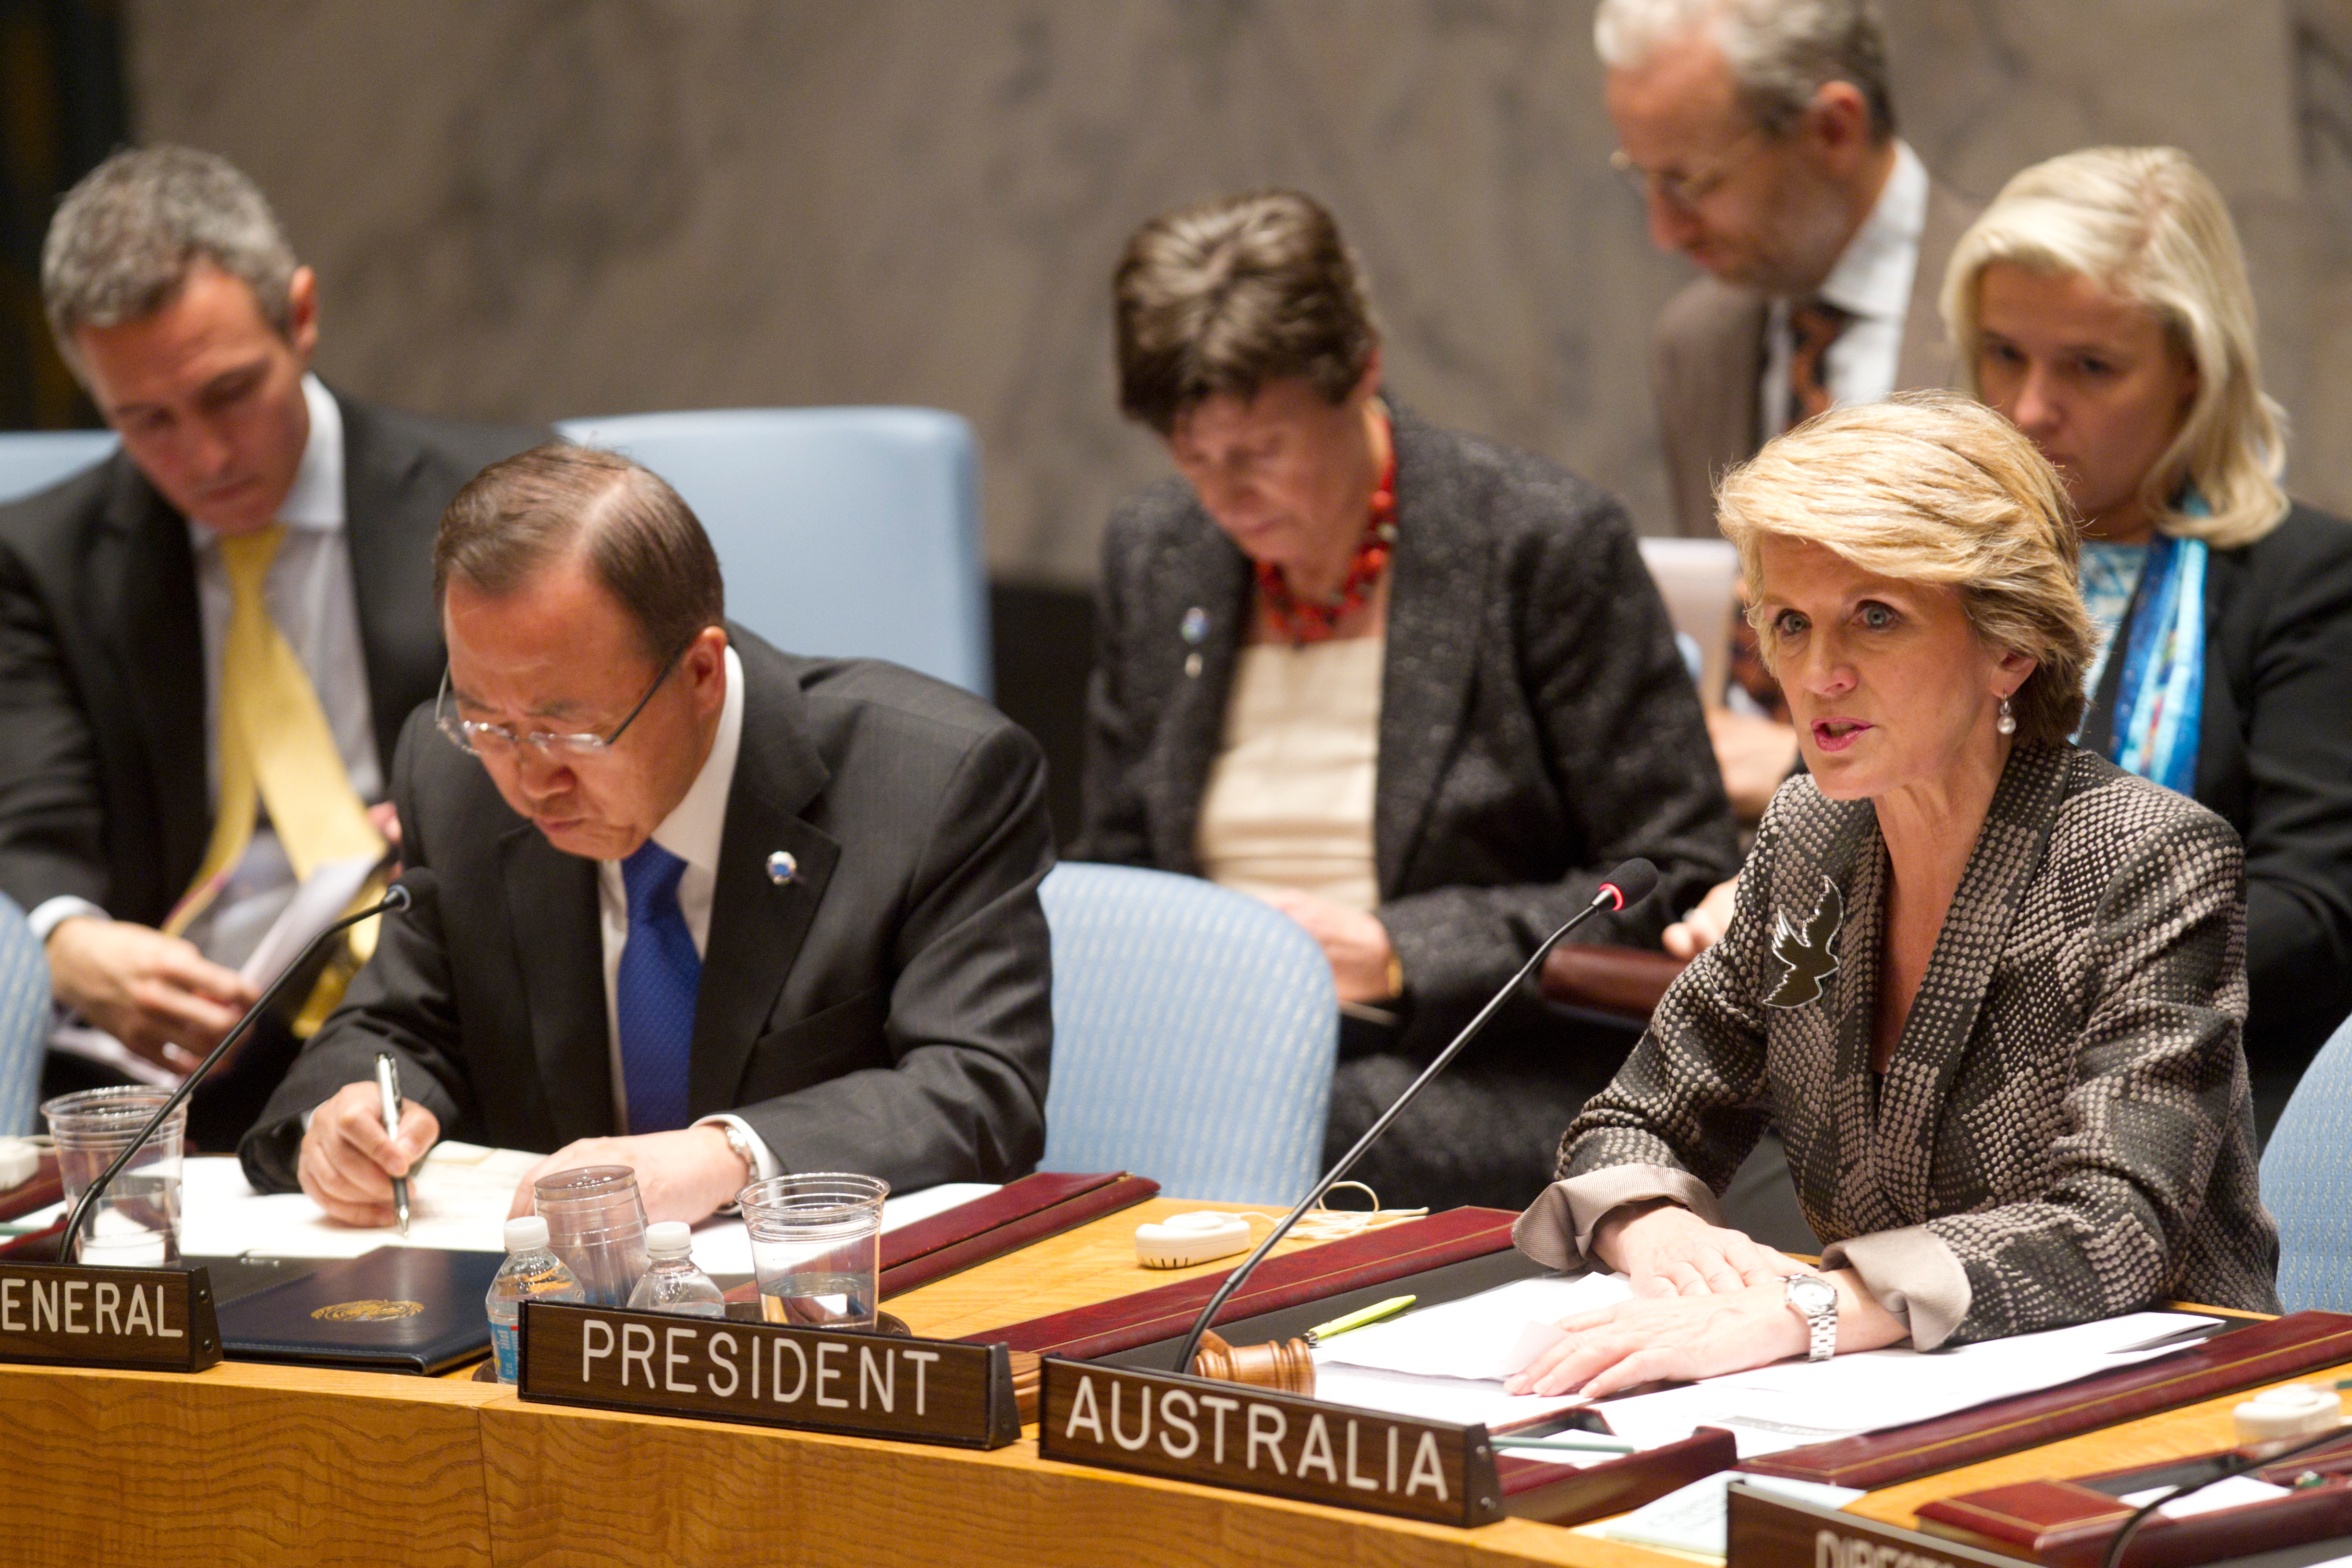 Security Council Holds High-level Meeting on Small Arms 26 September 2013. Foreign Minister Julie Bishop chairs the UN Security Council. On her right is Secretary-General Ban Ki-moon.